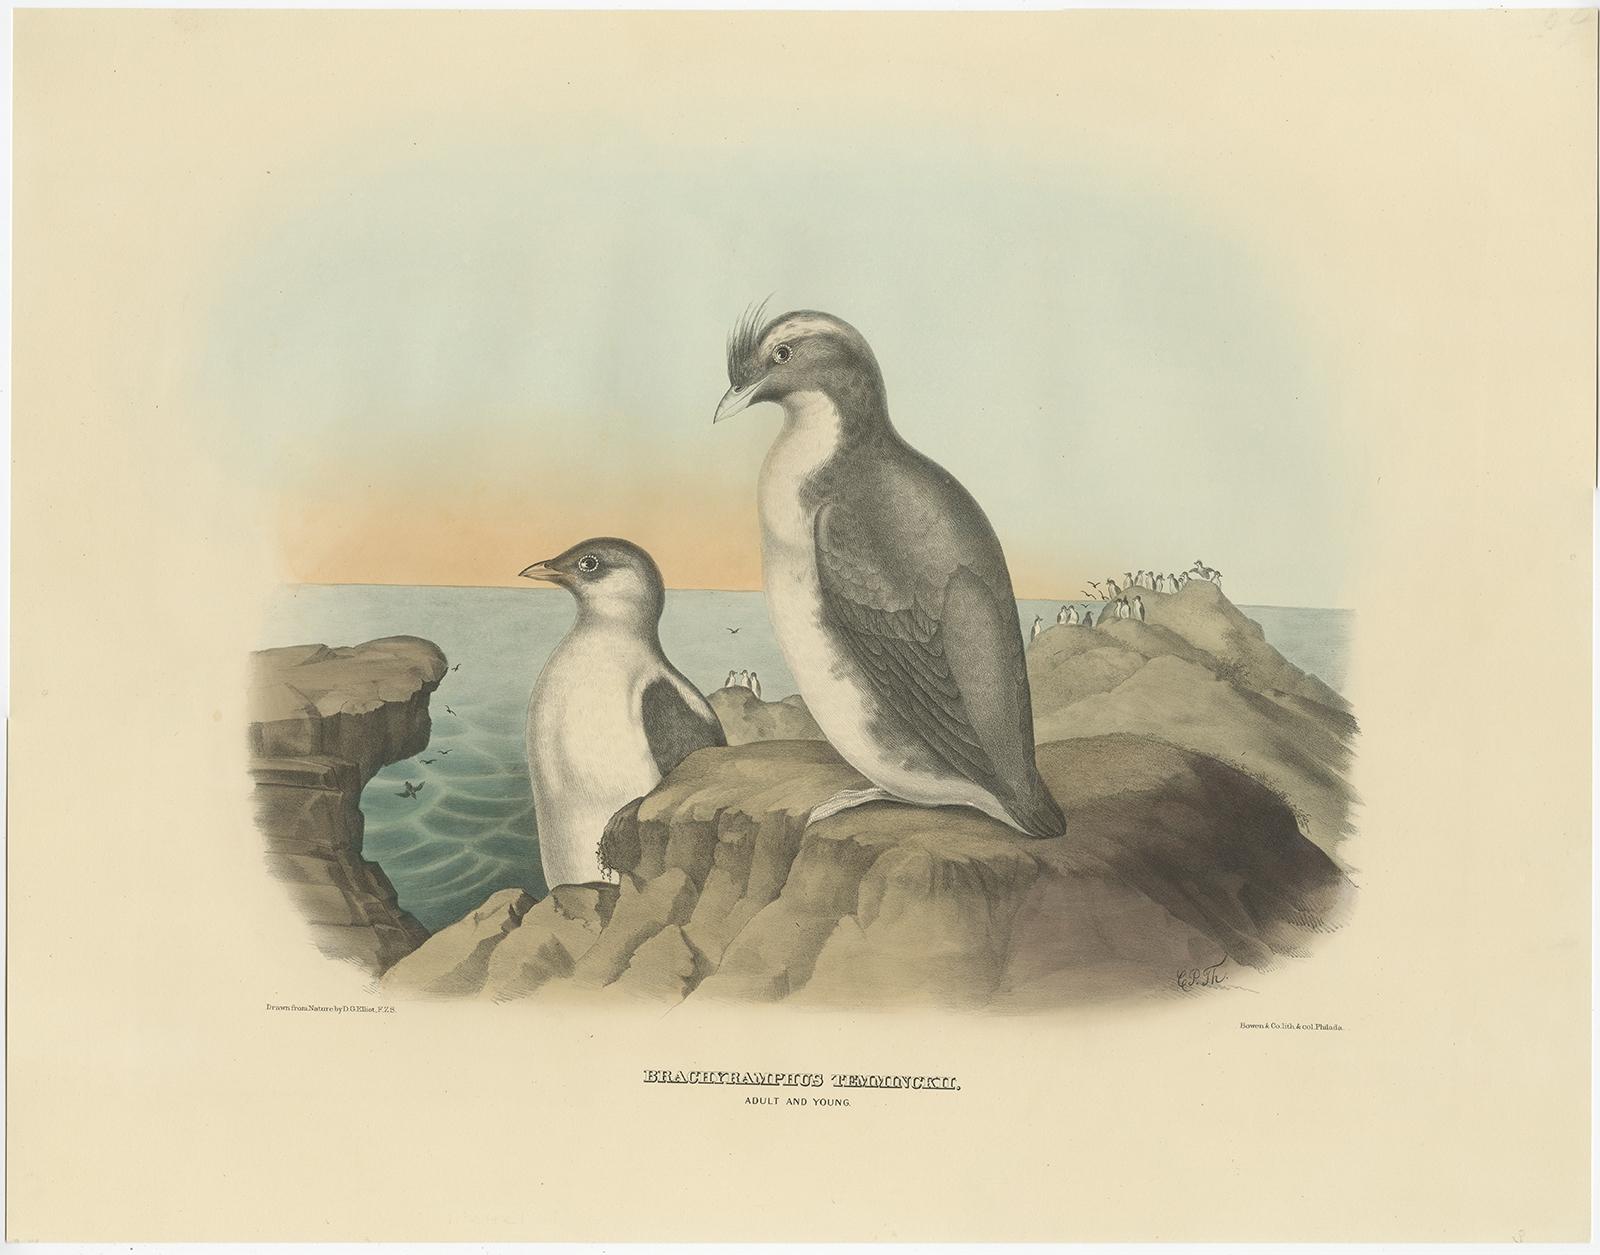 Antique bird print titled 'Brachyramphus Temminckii'. 

Old bird print depicting an adult and young Temminck's Auk. This print originates from 'The new and heretofore unfigured species of the birds of North America', published 1866-1869.

This